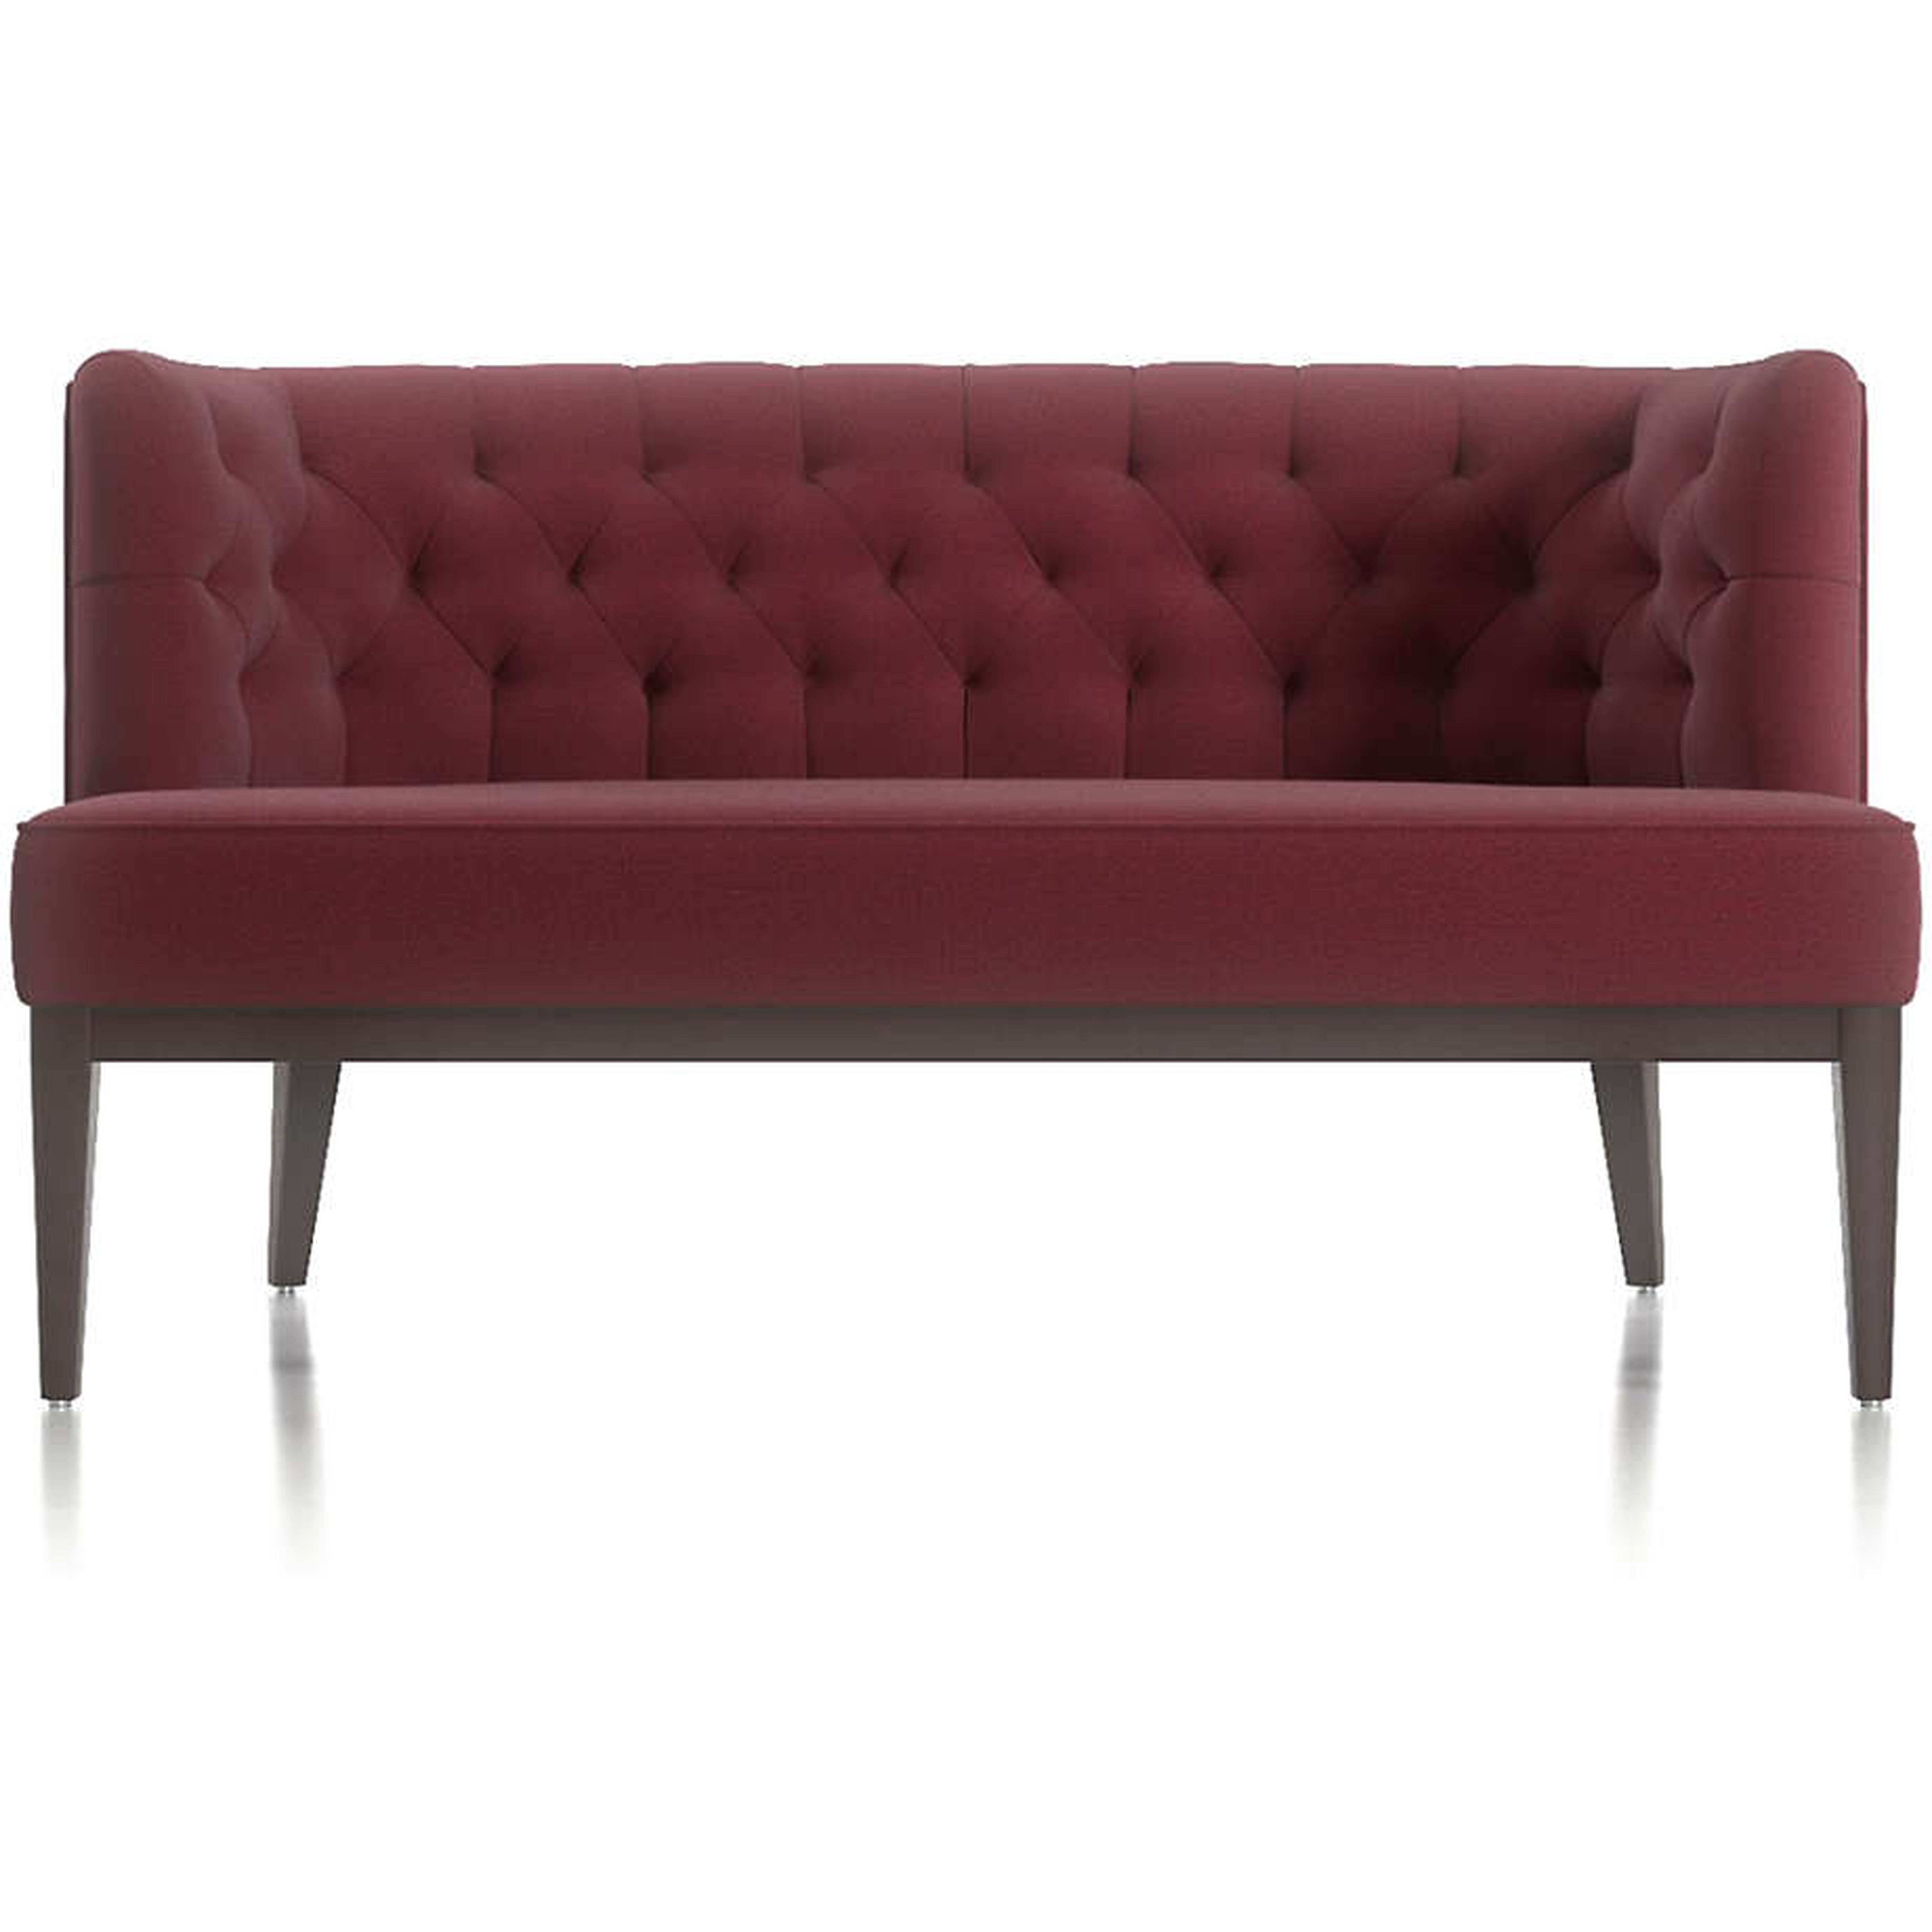 Grayson Tufted Settee - Crate and Barrel